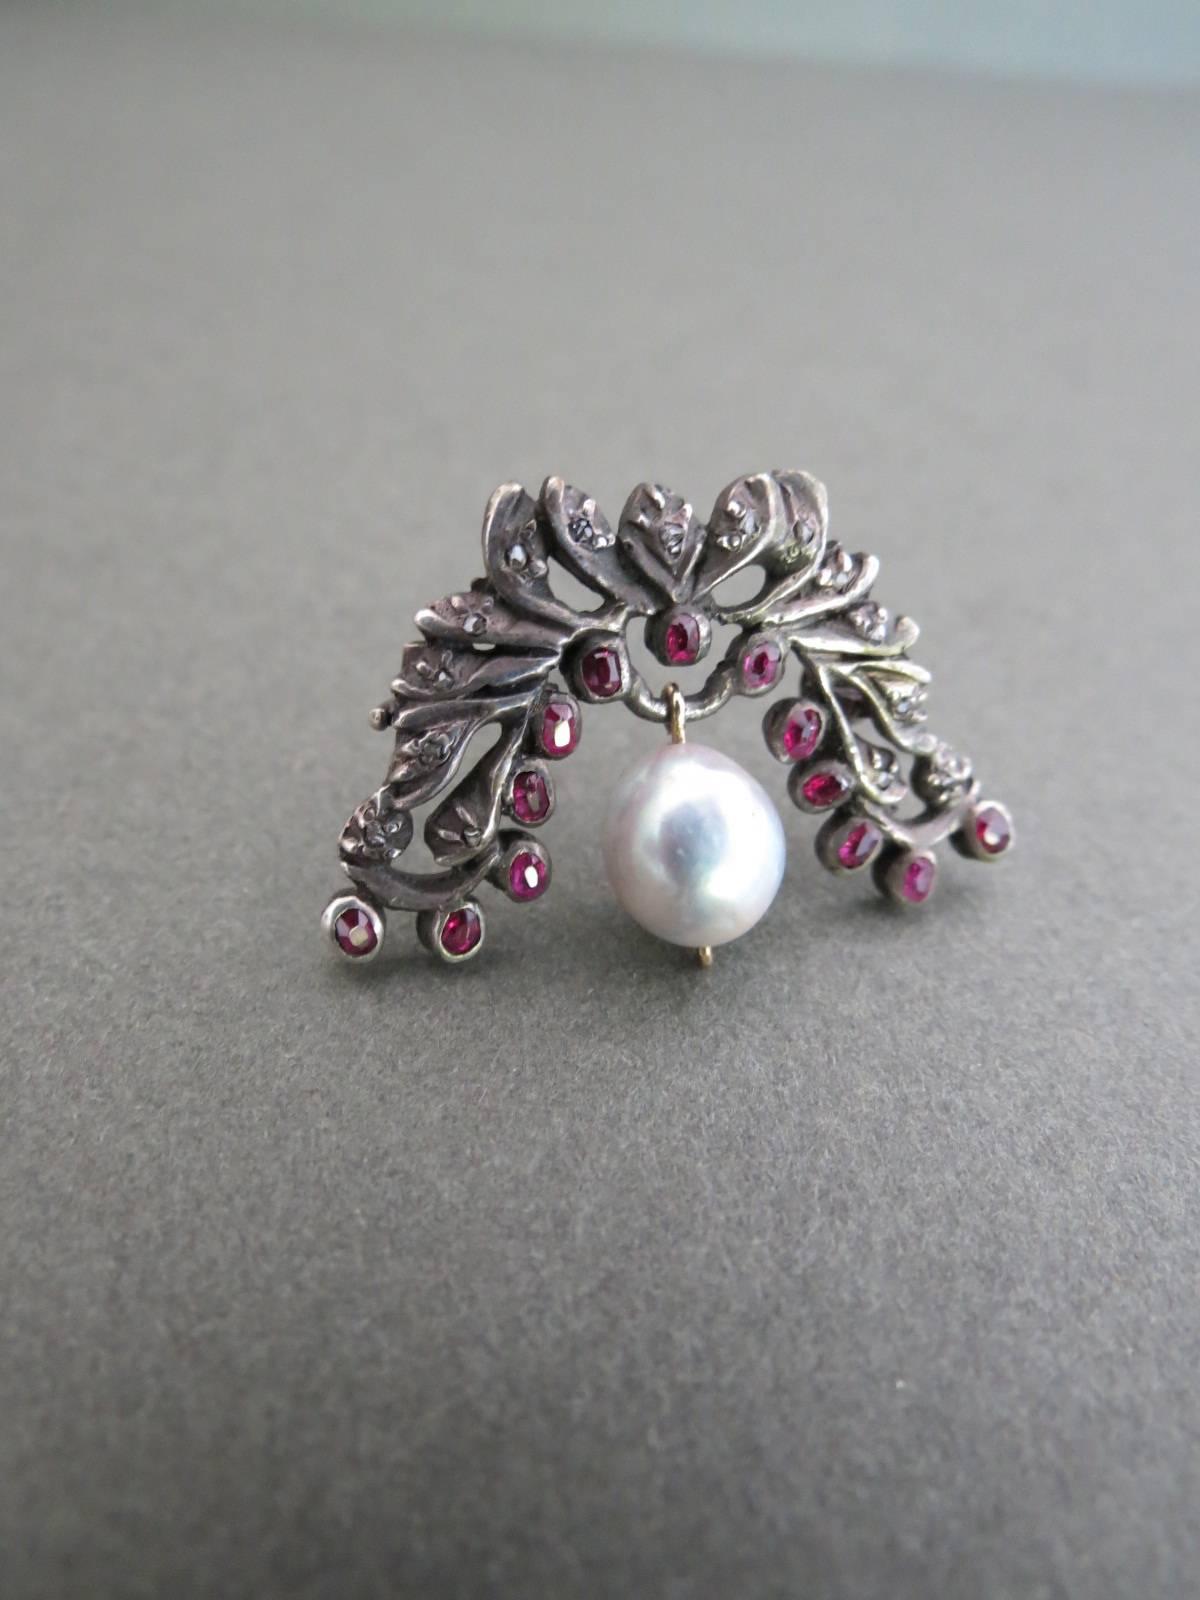 Vintage Victorian Sterling Silver Rose Cut Diamond Pearl Brooch.
Item Specifics
Height: 2.2cm (approx 1.00